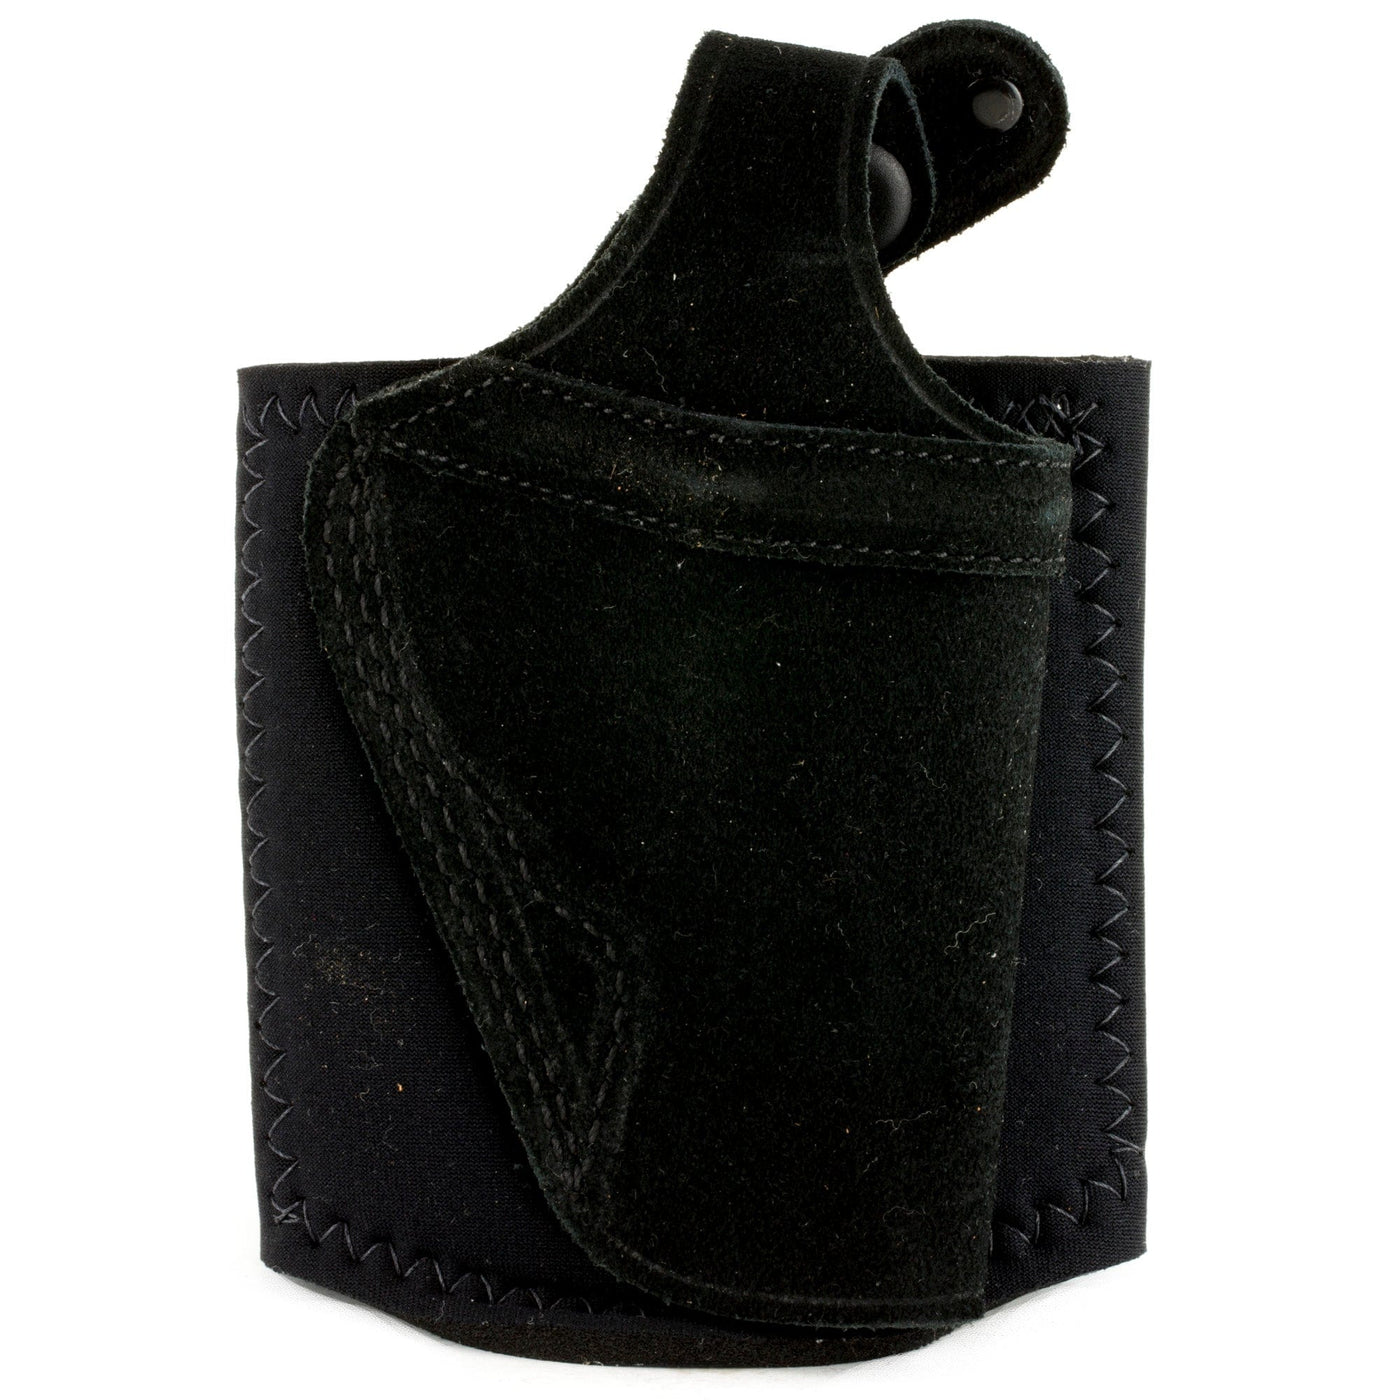 Galco Galco Ankle Lite Holster Rh - Lthr S&w J Fr 640 Cent 21/8 Bl Holsters